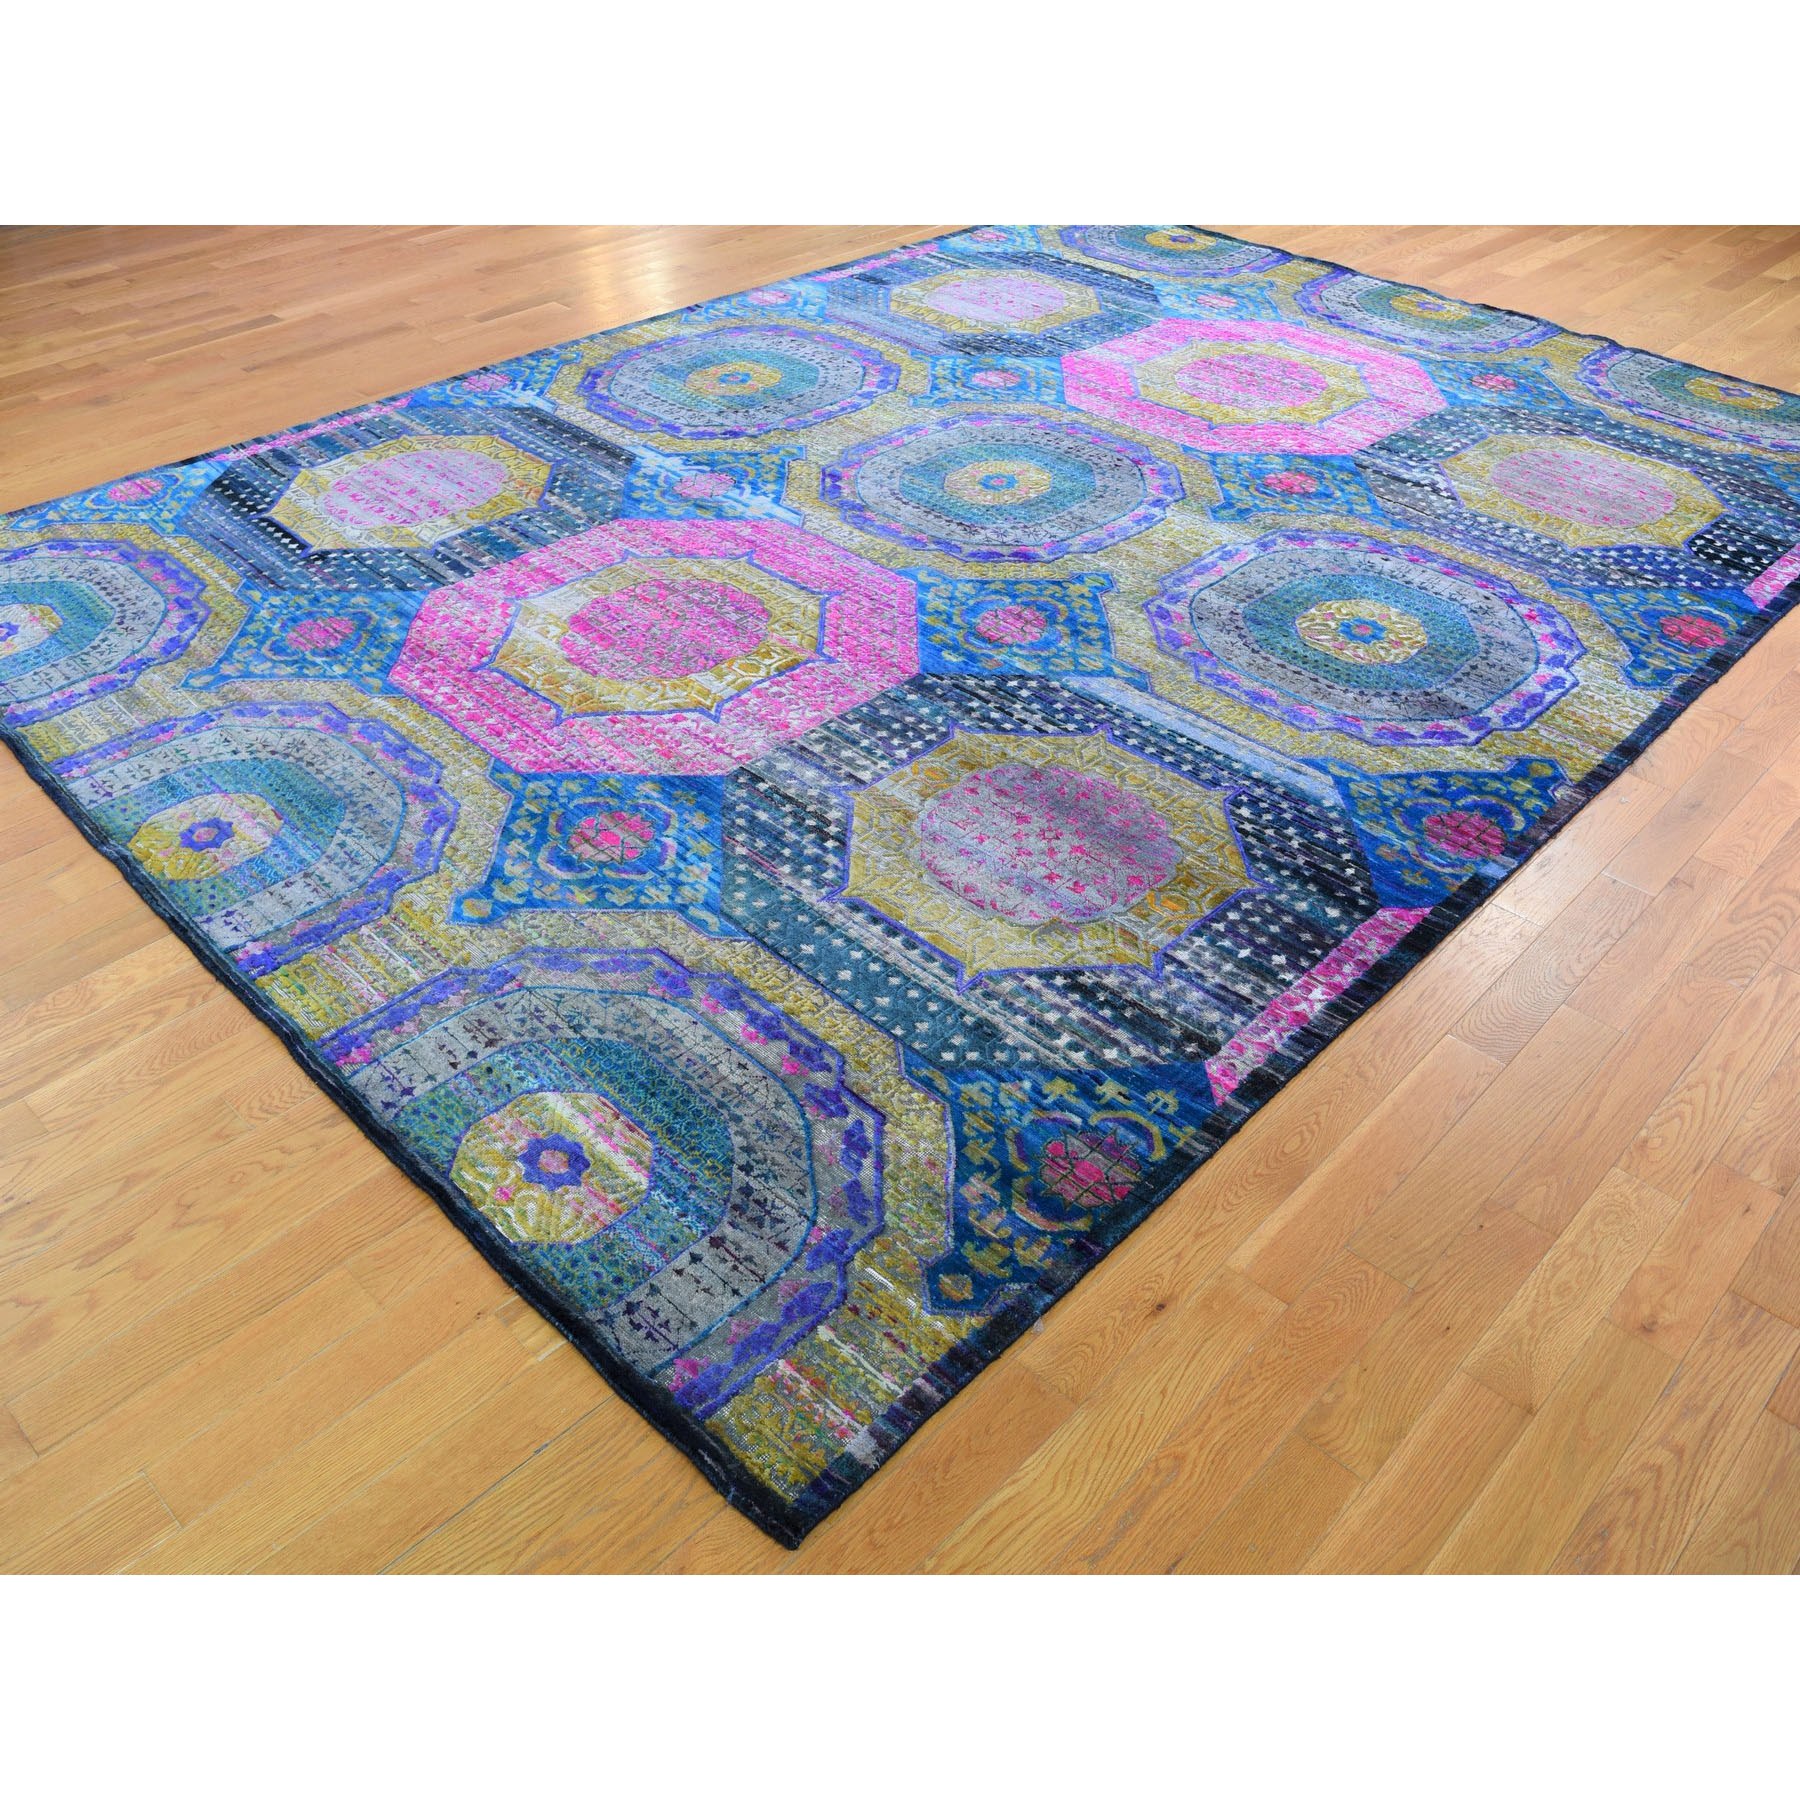 9-1 x12-5  Colorful Mamluk Design Sari Silk With Textured Wool Hand Knotted Oriental Rug 